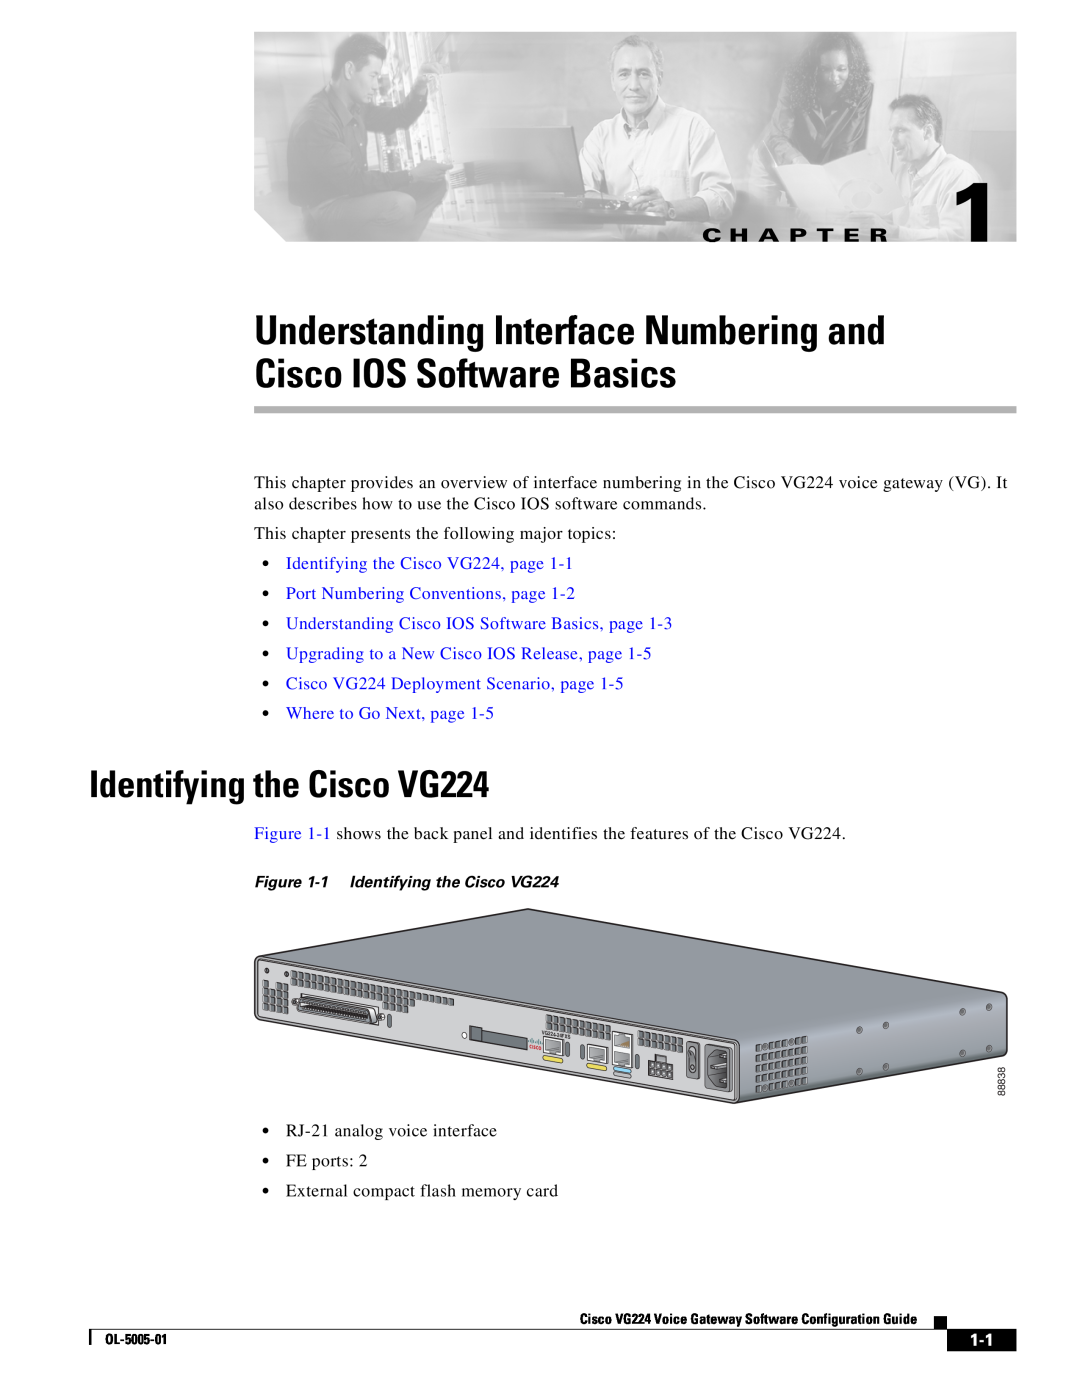 Cisco Systems manual Understanding Interface Numbering and Cisco IOS Software Basics, Identifying the Cisco VG224 